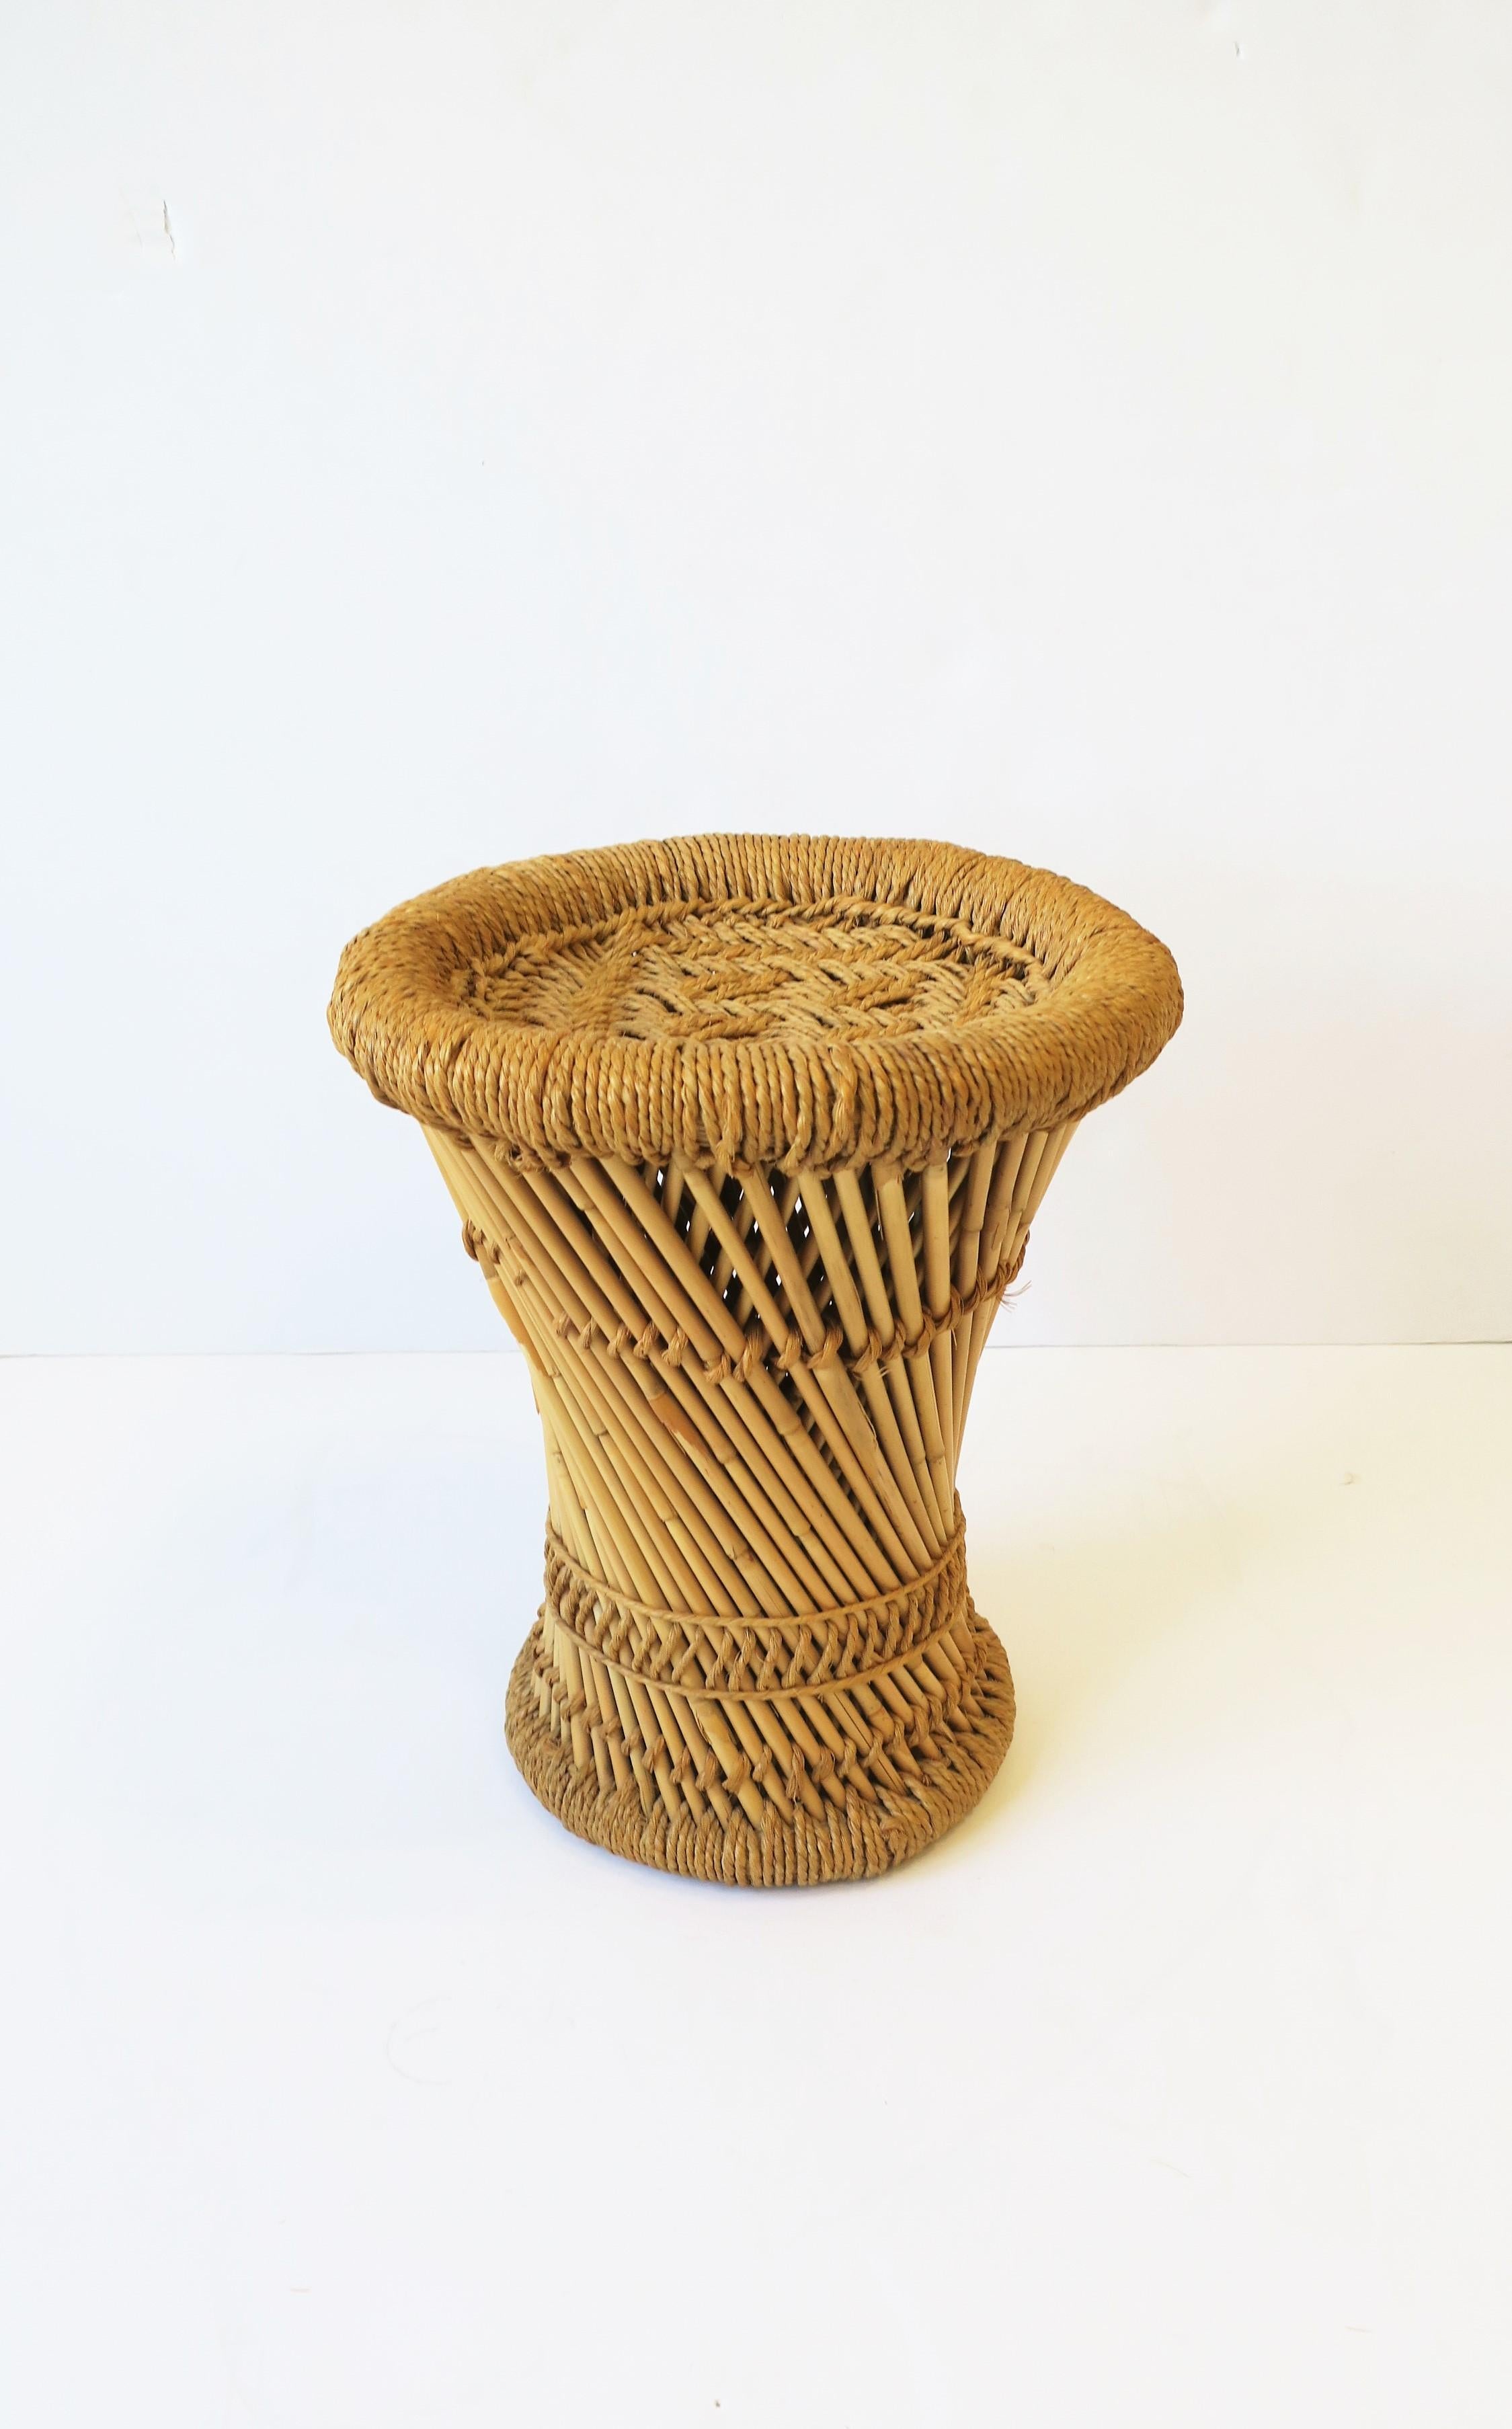 A great, small, vintage wicker pencil reed stool or side table, circa 20th century, India. Stool is sturdy and well made and can support a human being (as intended.) Stool can also double as a small side table or plant stand with its custom